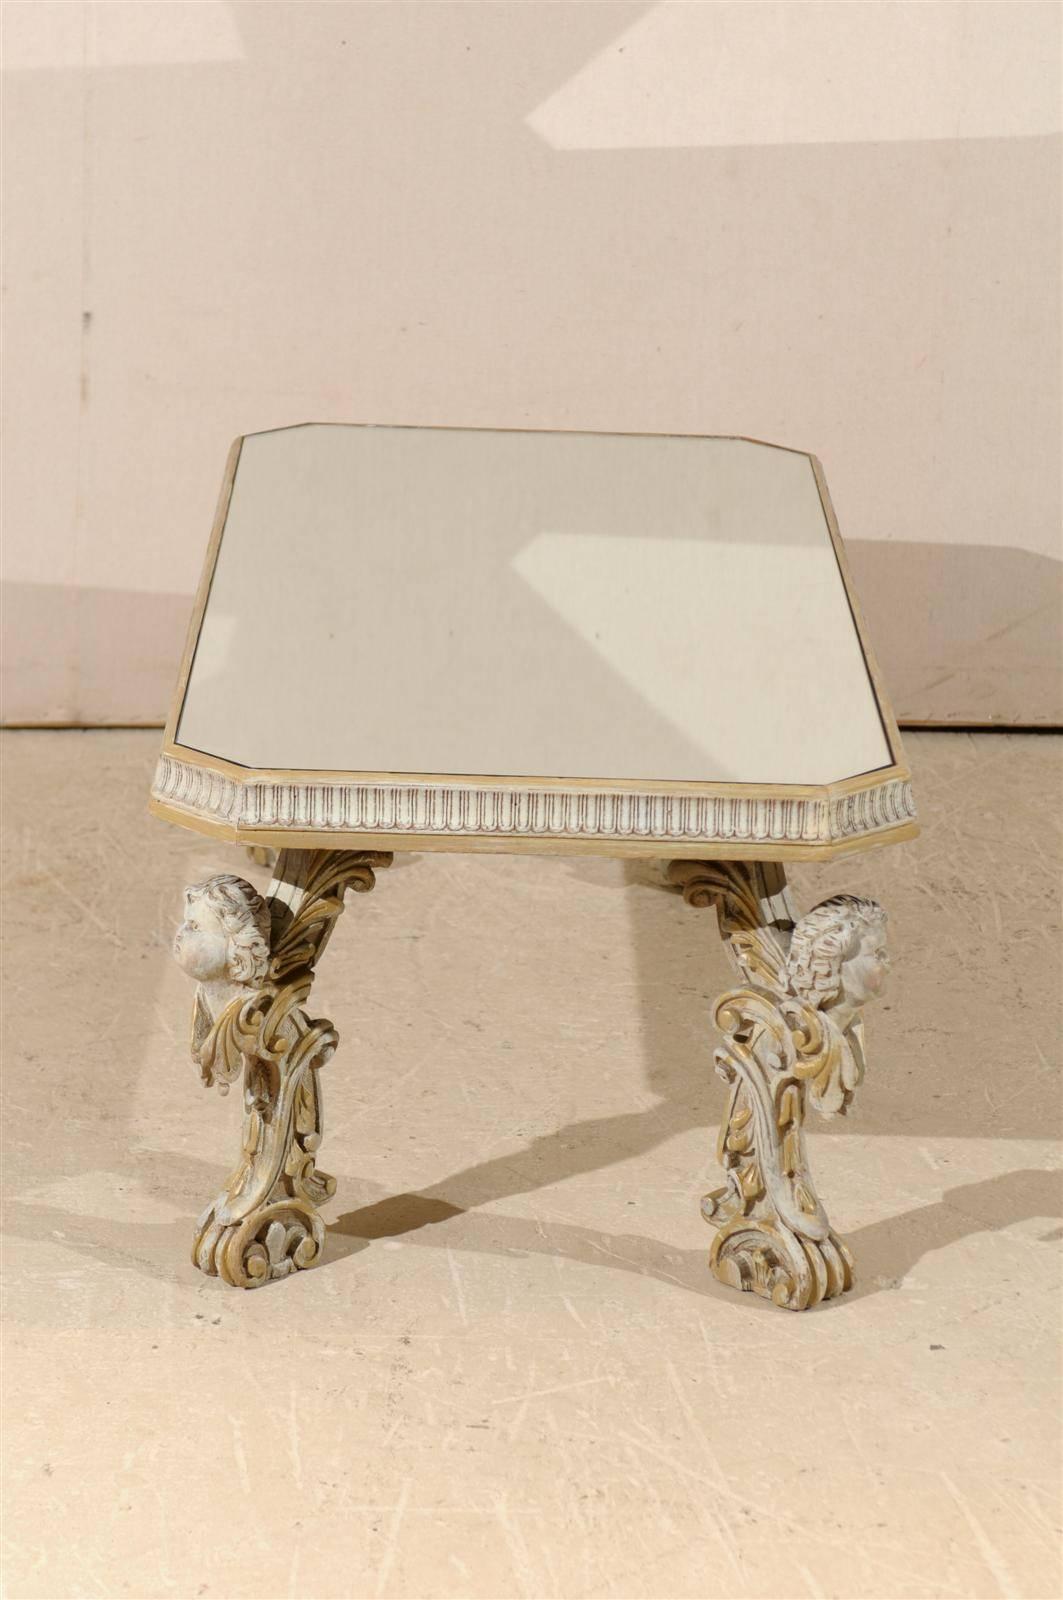 Italian Mirrored Top Coffee Table with Ornate Putti Carved Legs, Circa 1920s For Sale 3